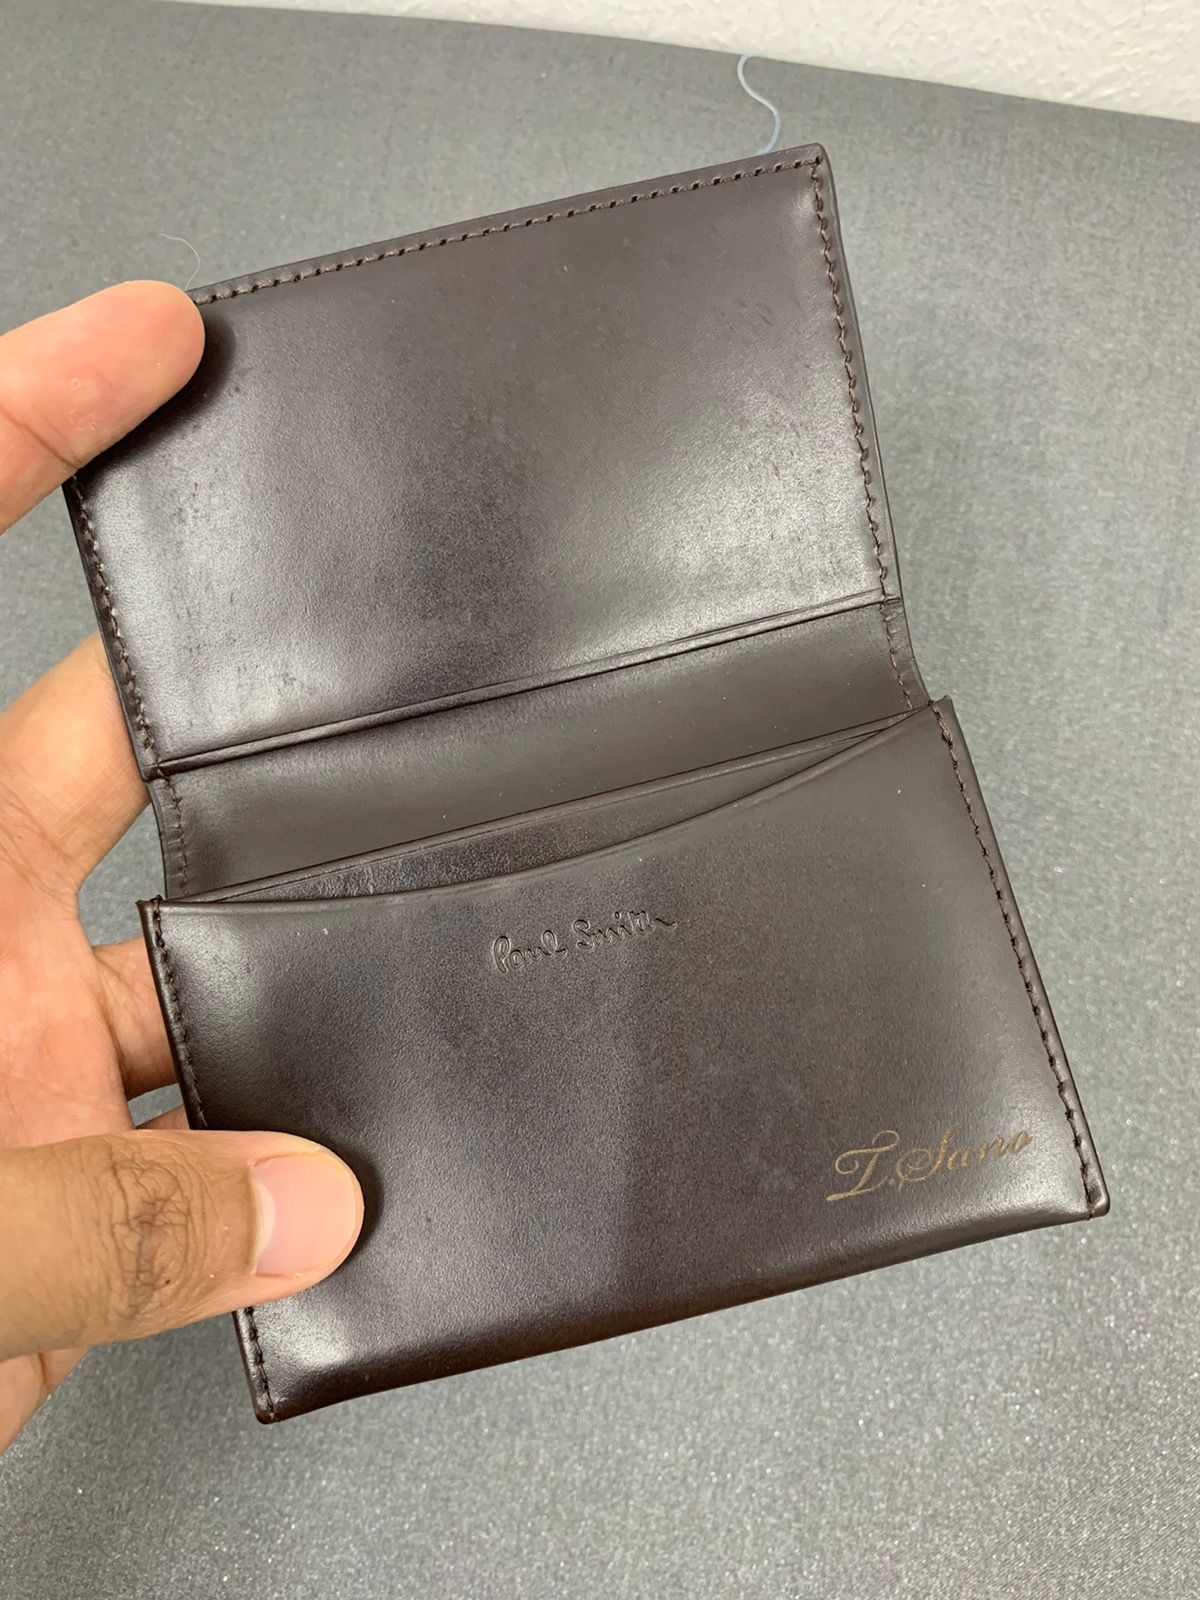 Paul Smith Card Holder Wallet Leather - 4